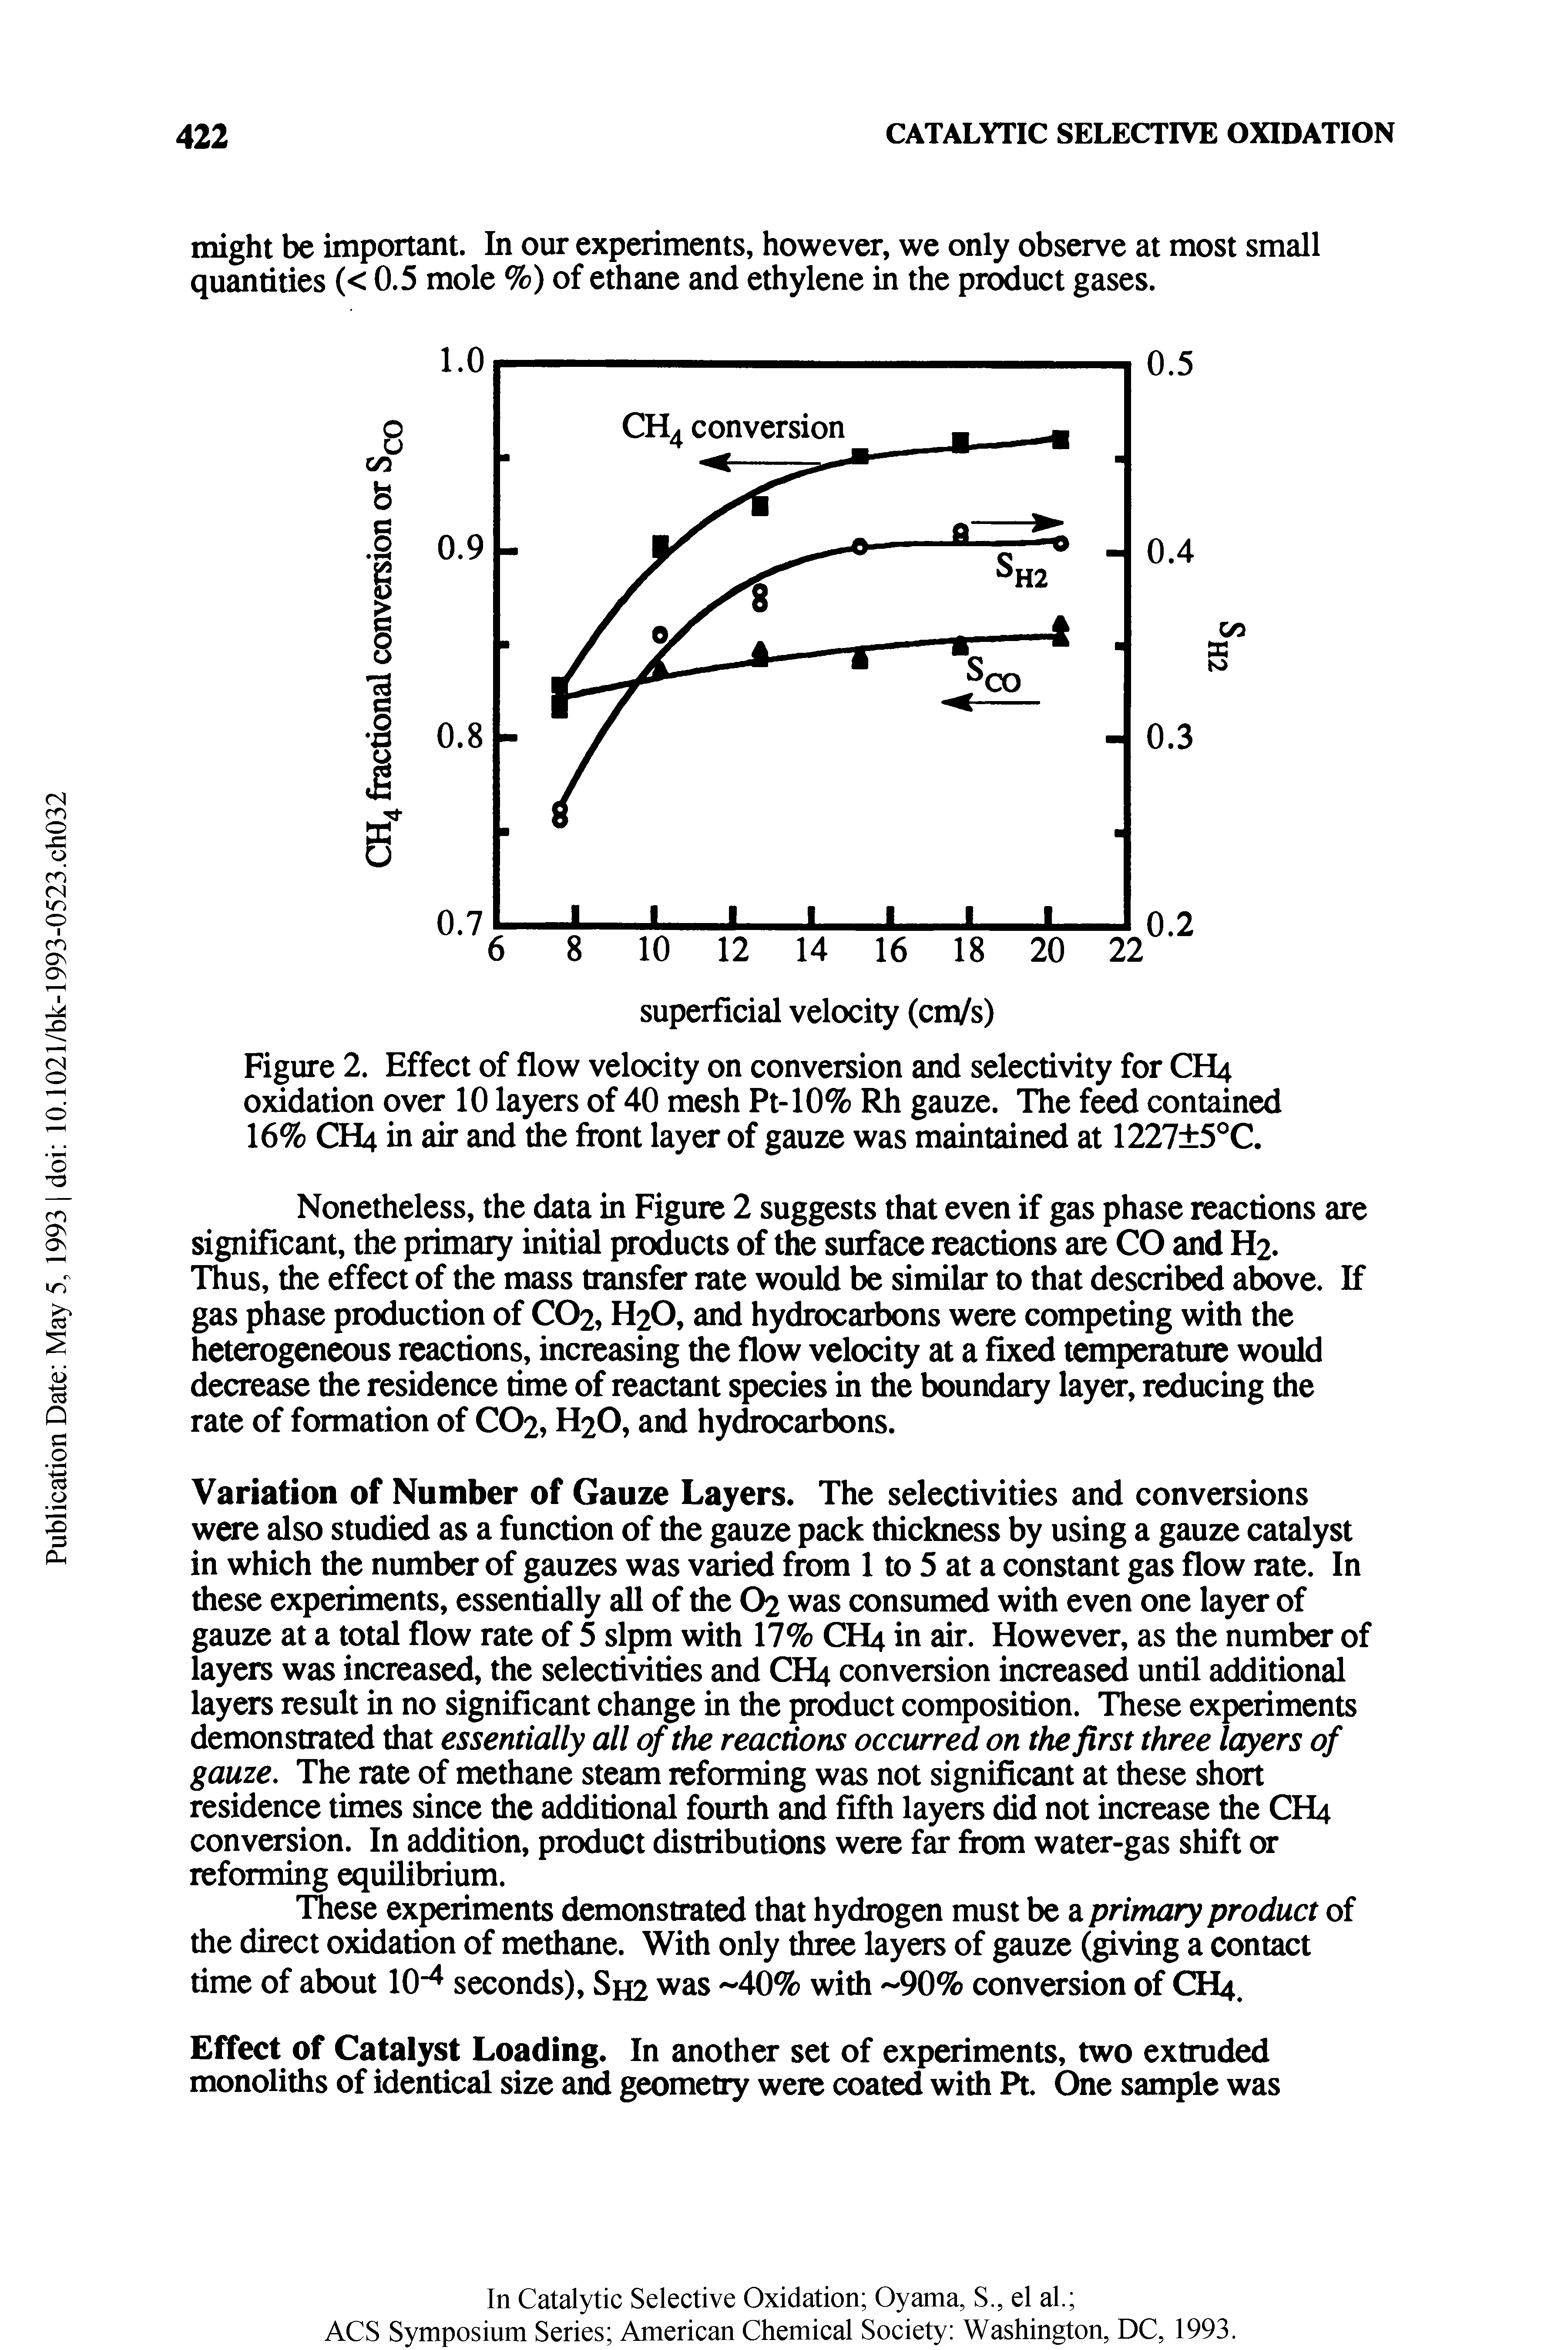 Figure 2. Effect of flow velocity on conversion and selectivity for CH4 oxidation over 10 layers of 40 mesh Pt-10% Rh gauze. The feed contained 16% CH4 in air and the front layer of gauze was maintained at 1227 5°C.